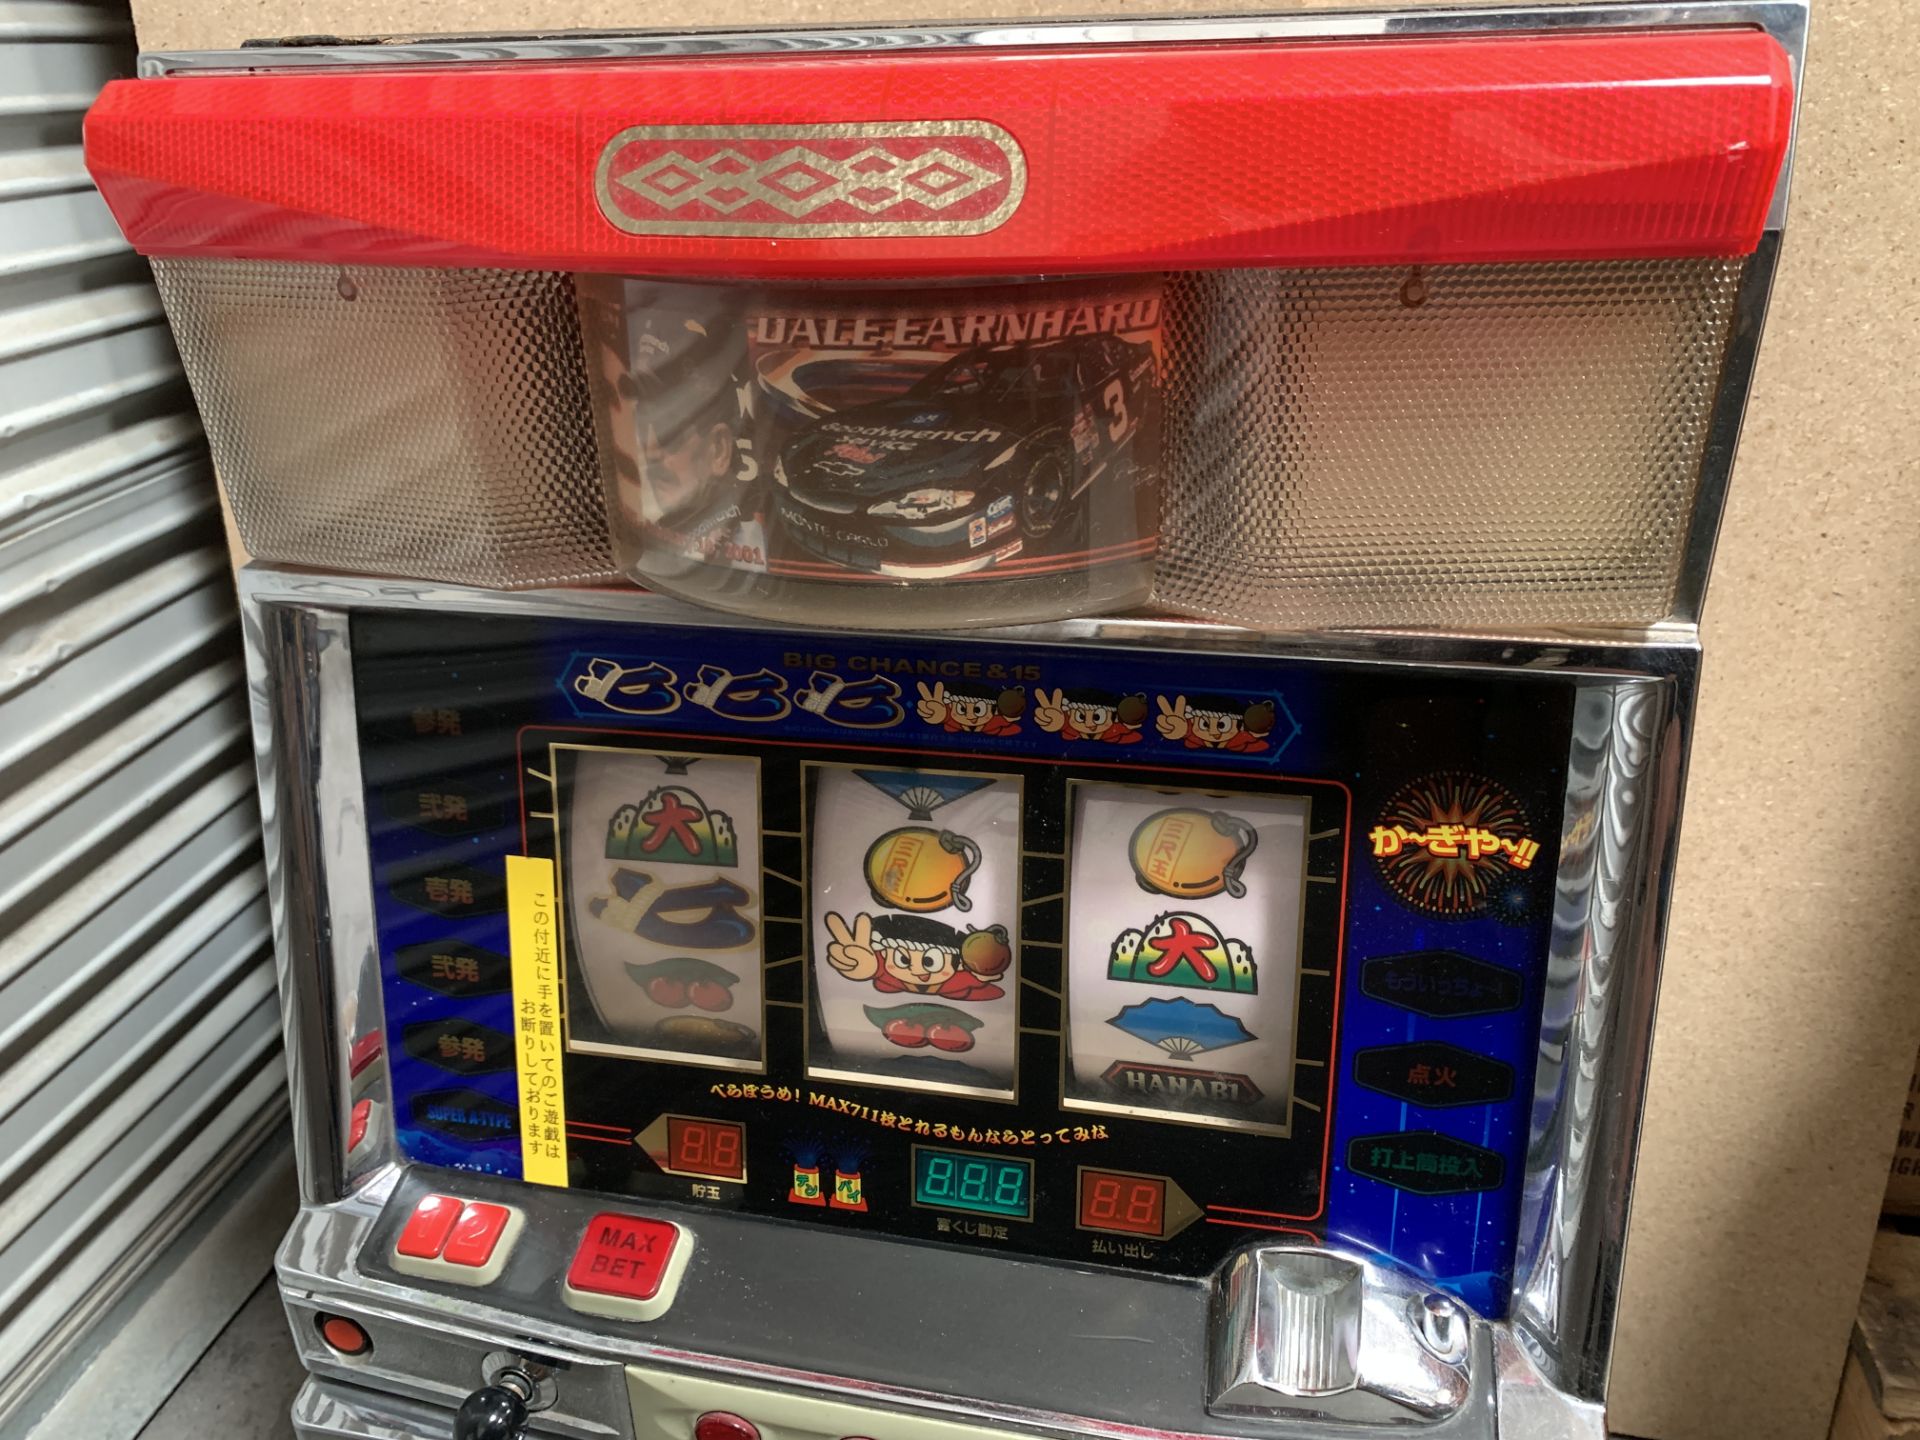 Vintage Classic Slot Machine, Dale Ernhardt Racing, by Aruze Corp + Coins - Image 4 of 9